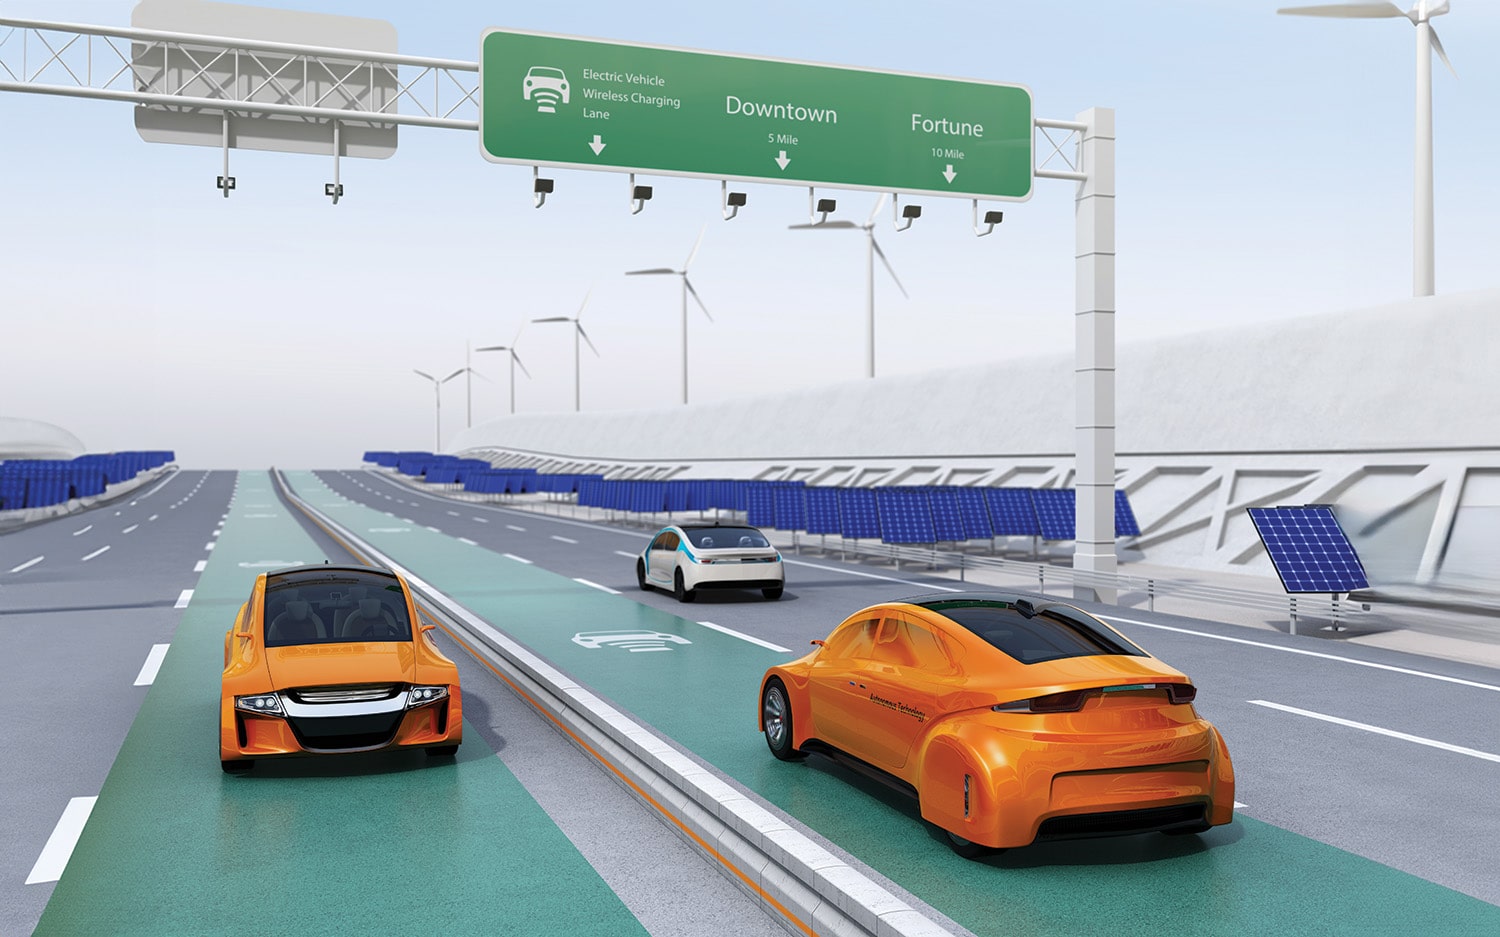 Electric vehicles driving on a dedicated lane with overhead digital traffic signs and solar panels on the side of the road.